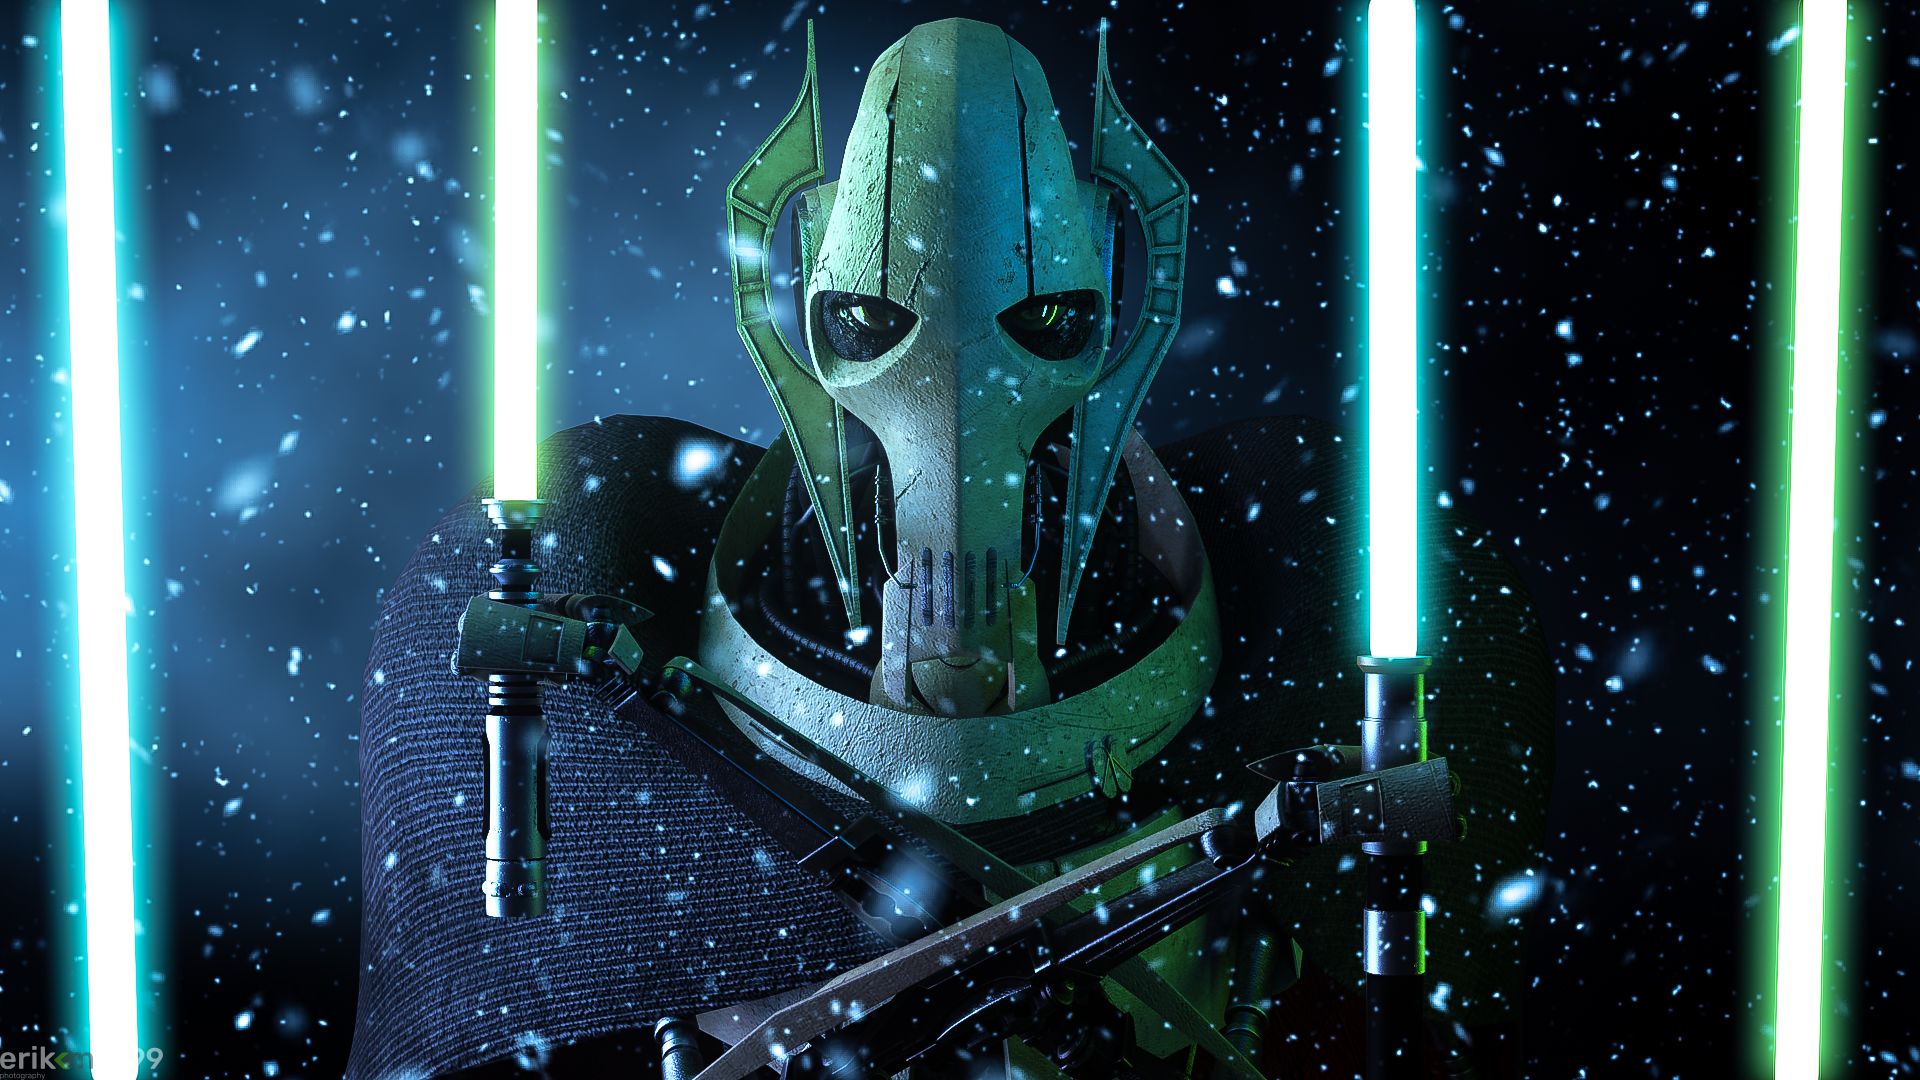 Download General Grievous wallpapers for mobile phone free General  Grievous HD pictures